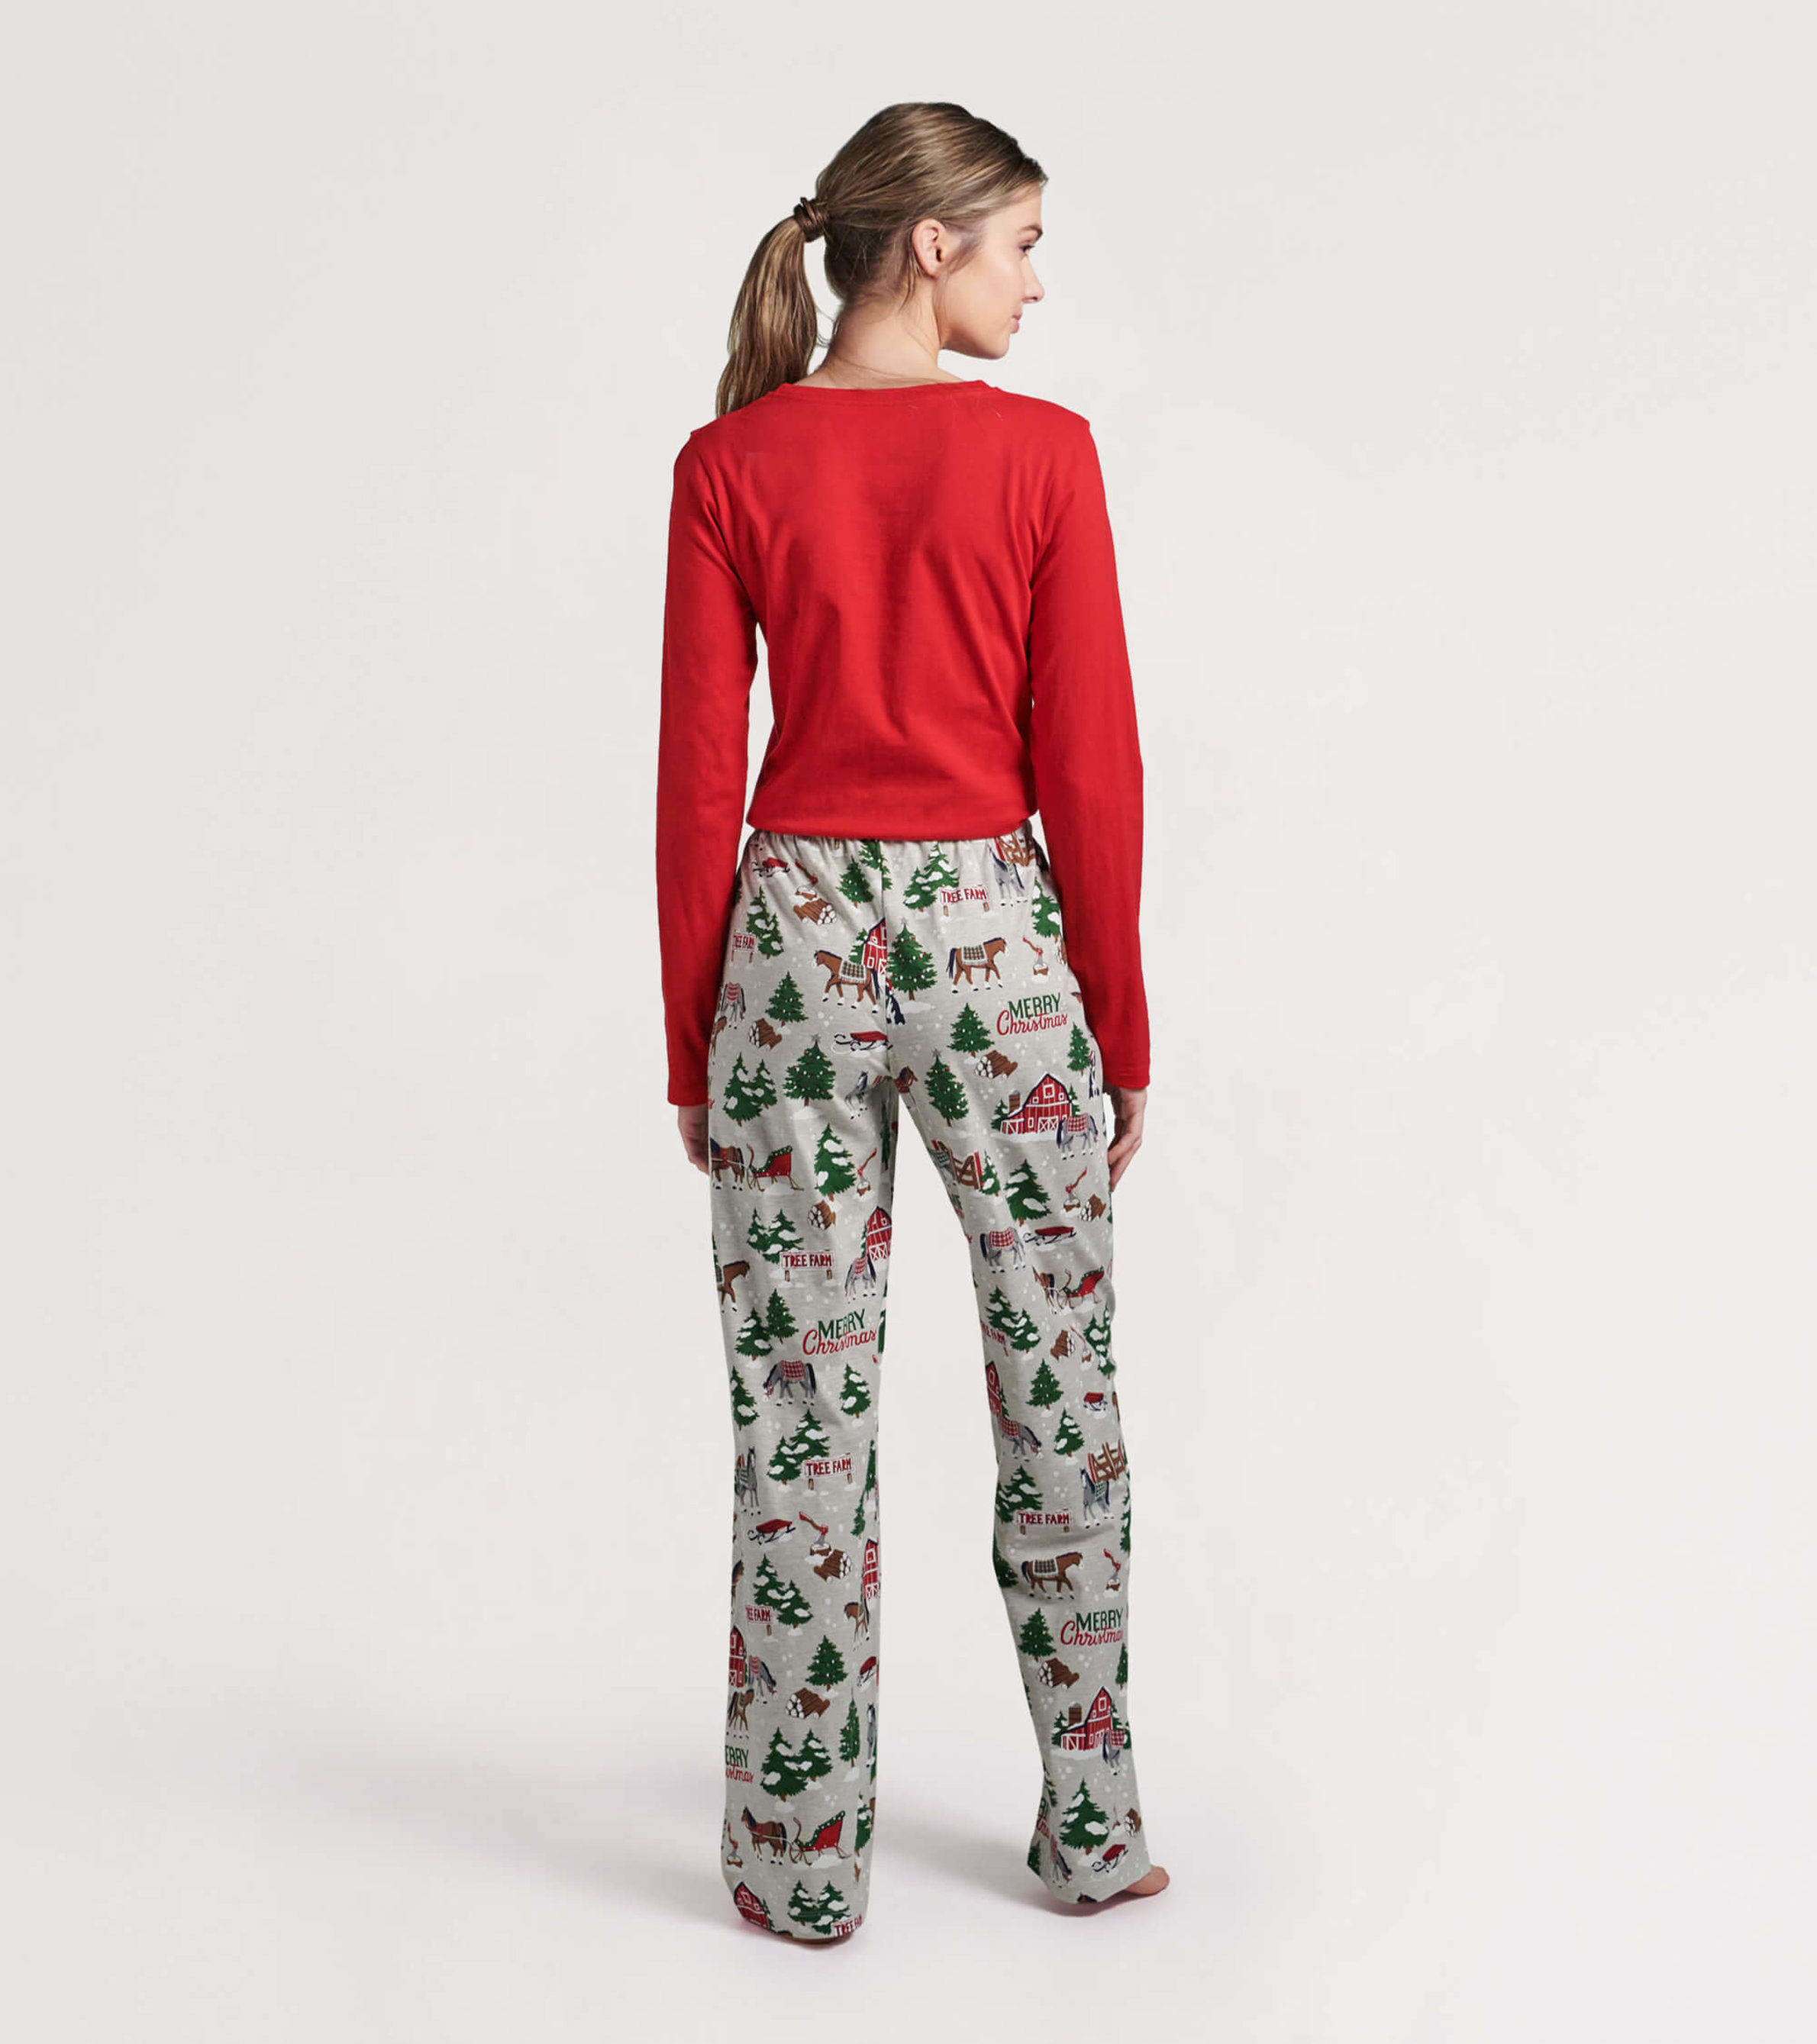 Women's Country Christmas Jersey Pajama Pants - Little Blue House US